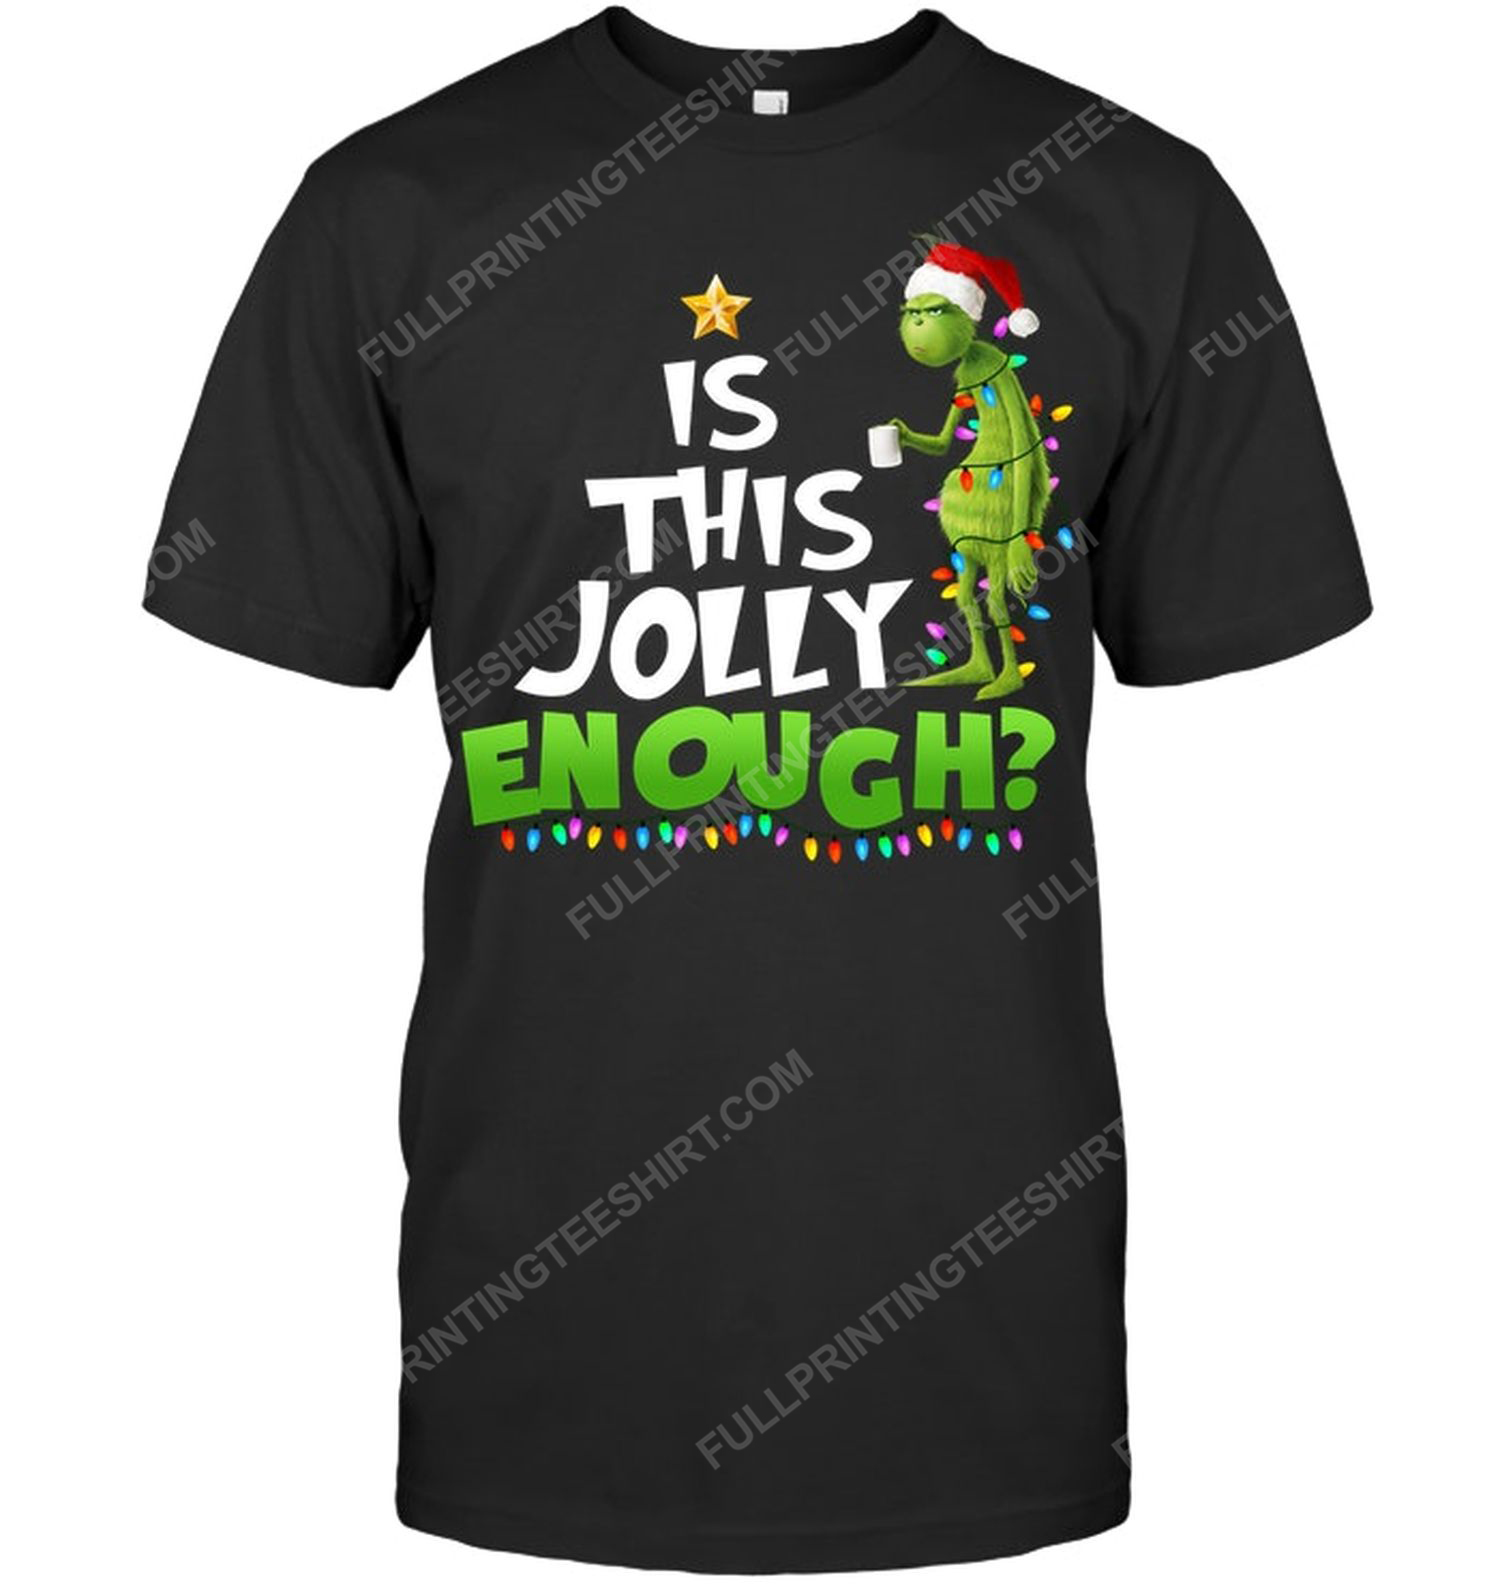 Christmas time the grinch is this jolly enough tshirt